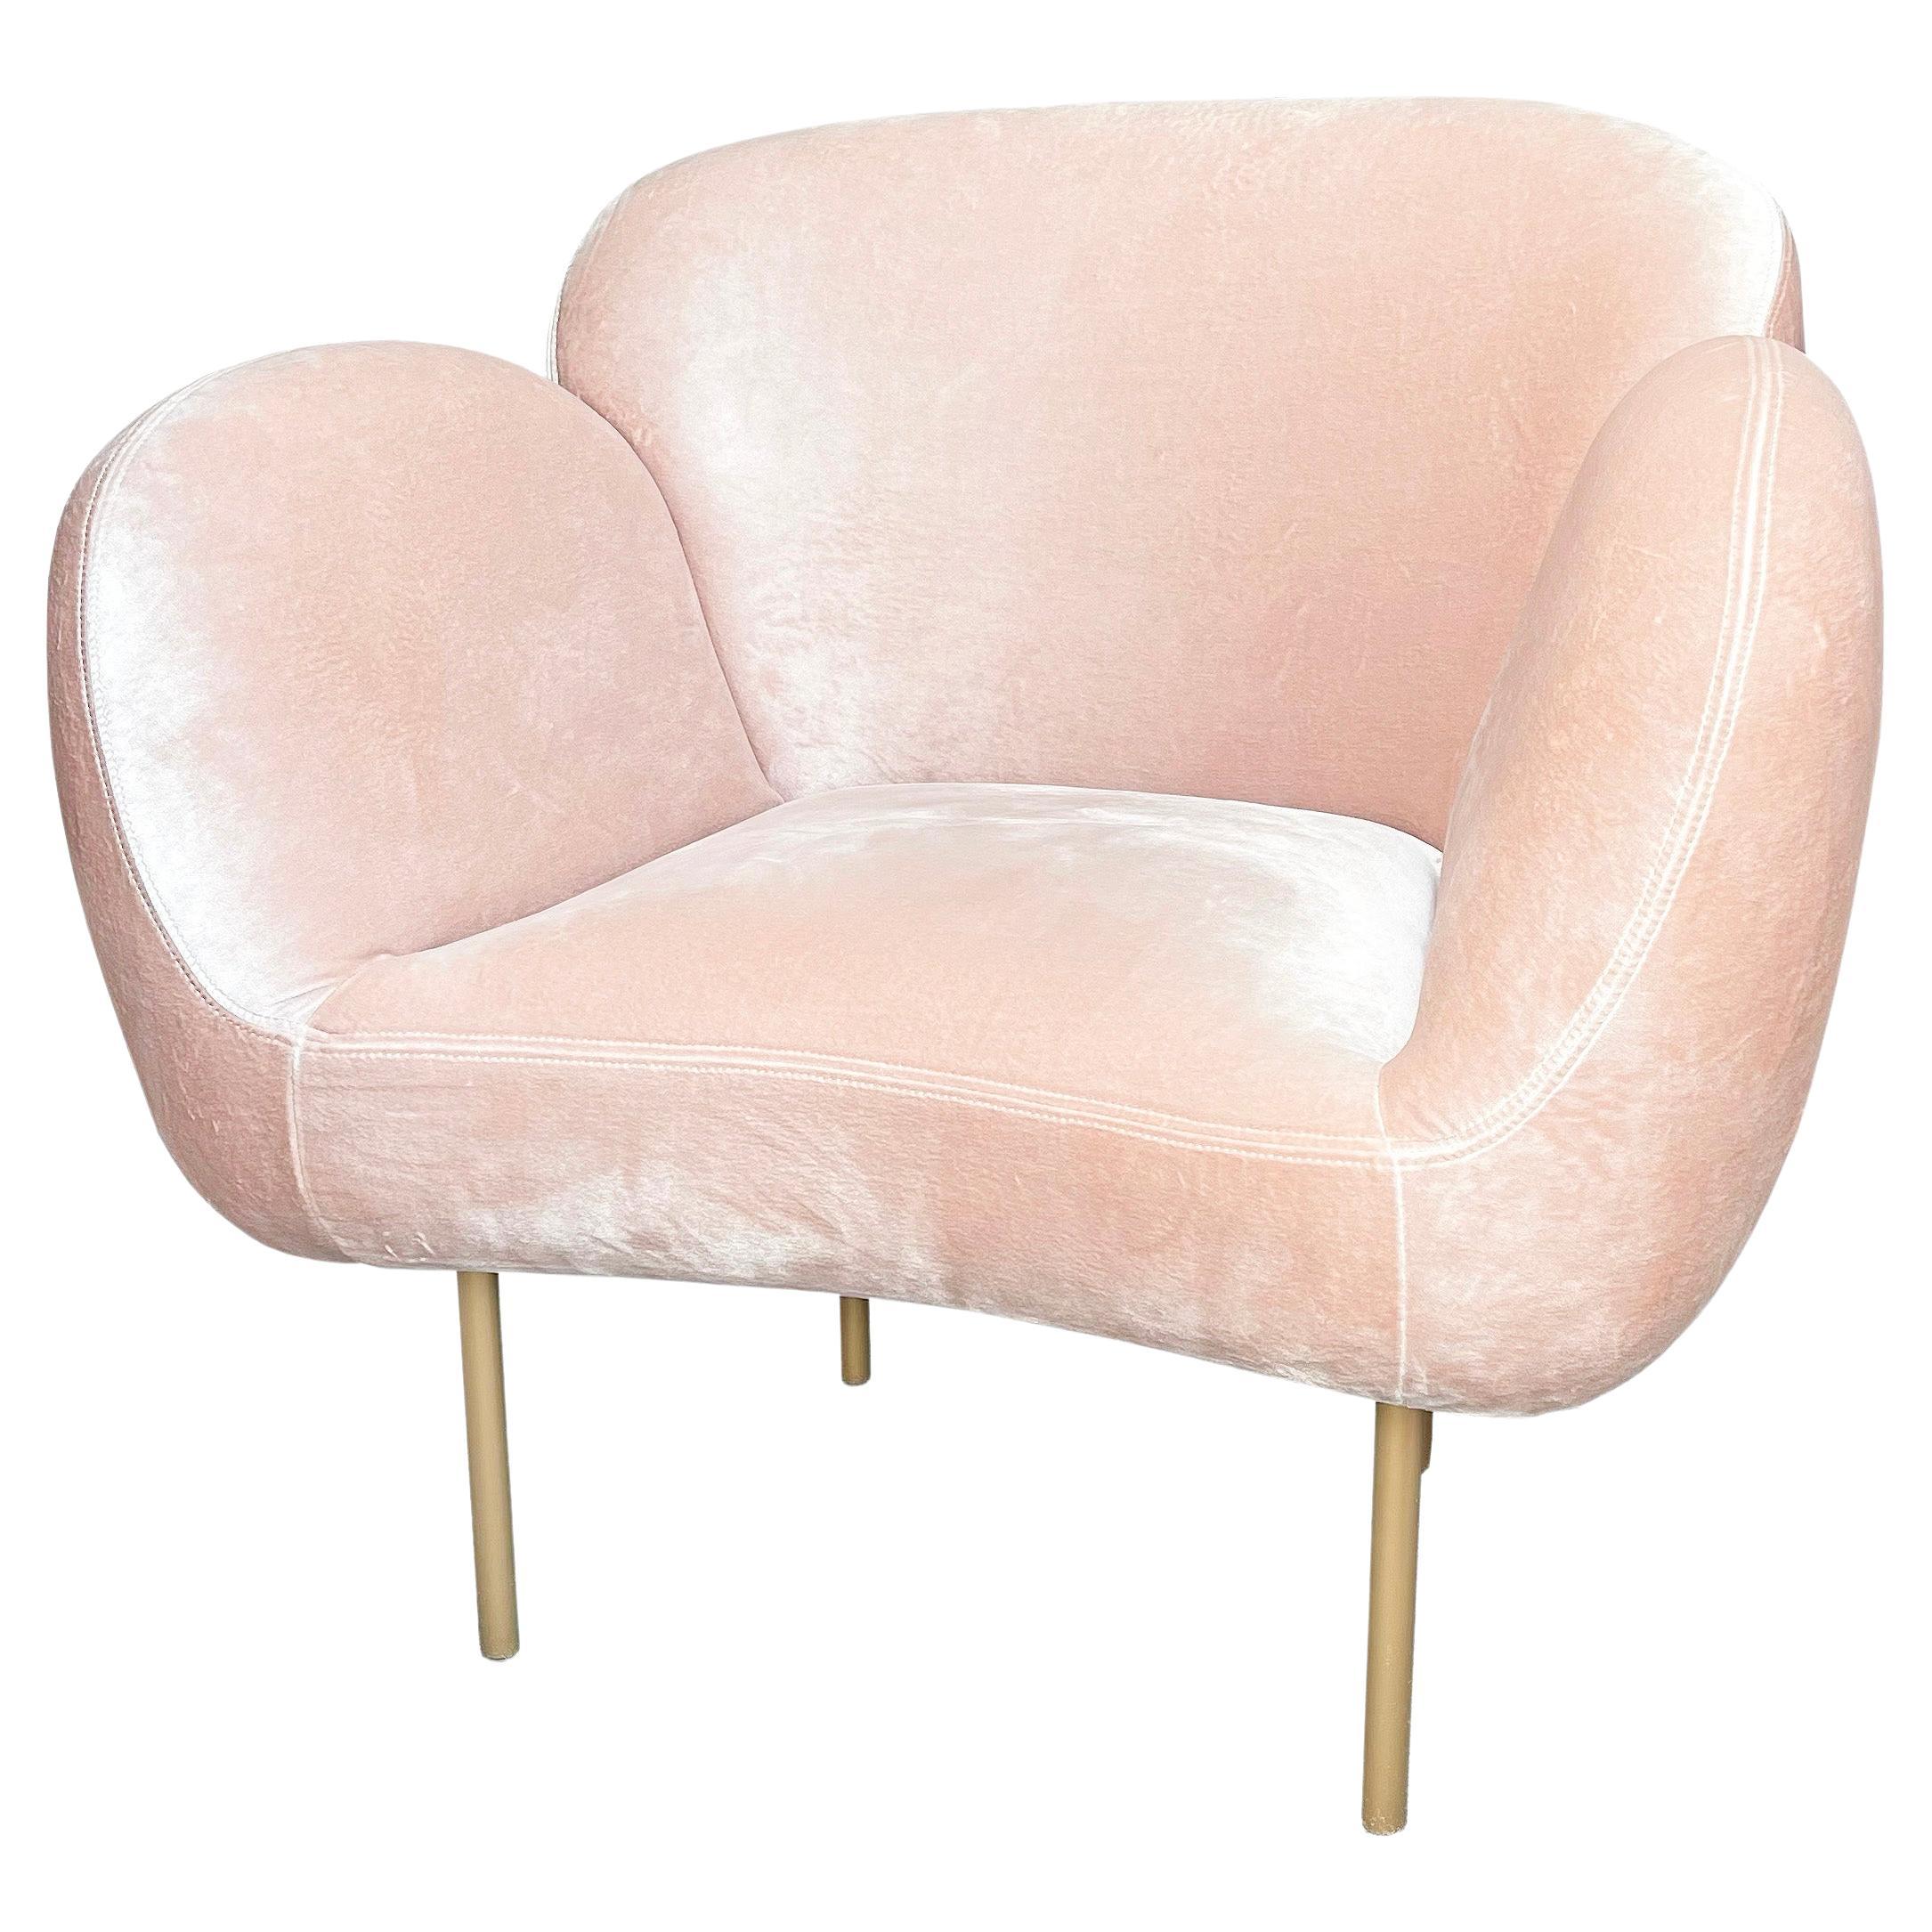 Contemporary Pink Suede Upholstered Armchair, Stardust Armchair by Nika Zupanc For Sale